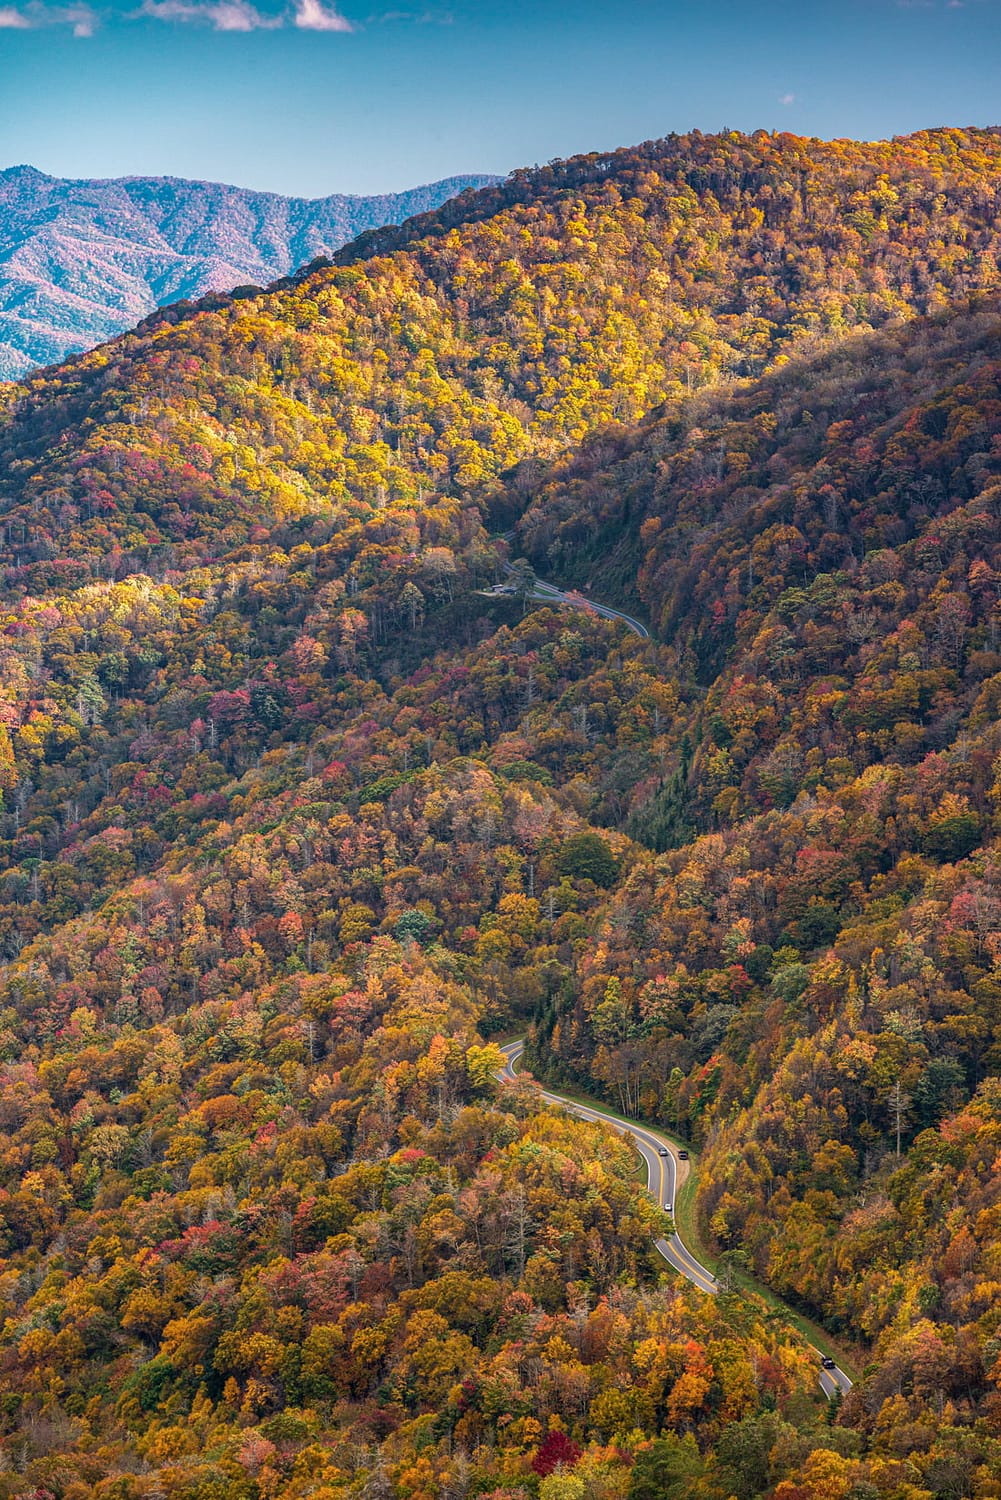 Fall colors in The Great Smoky Mountains